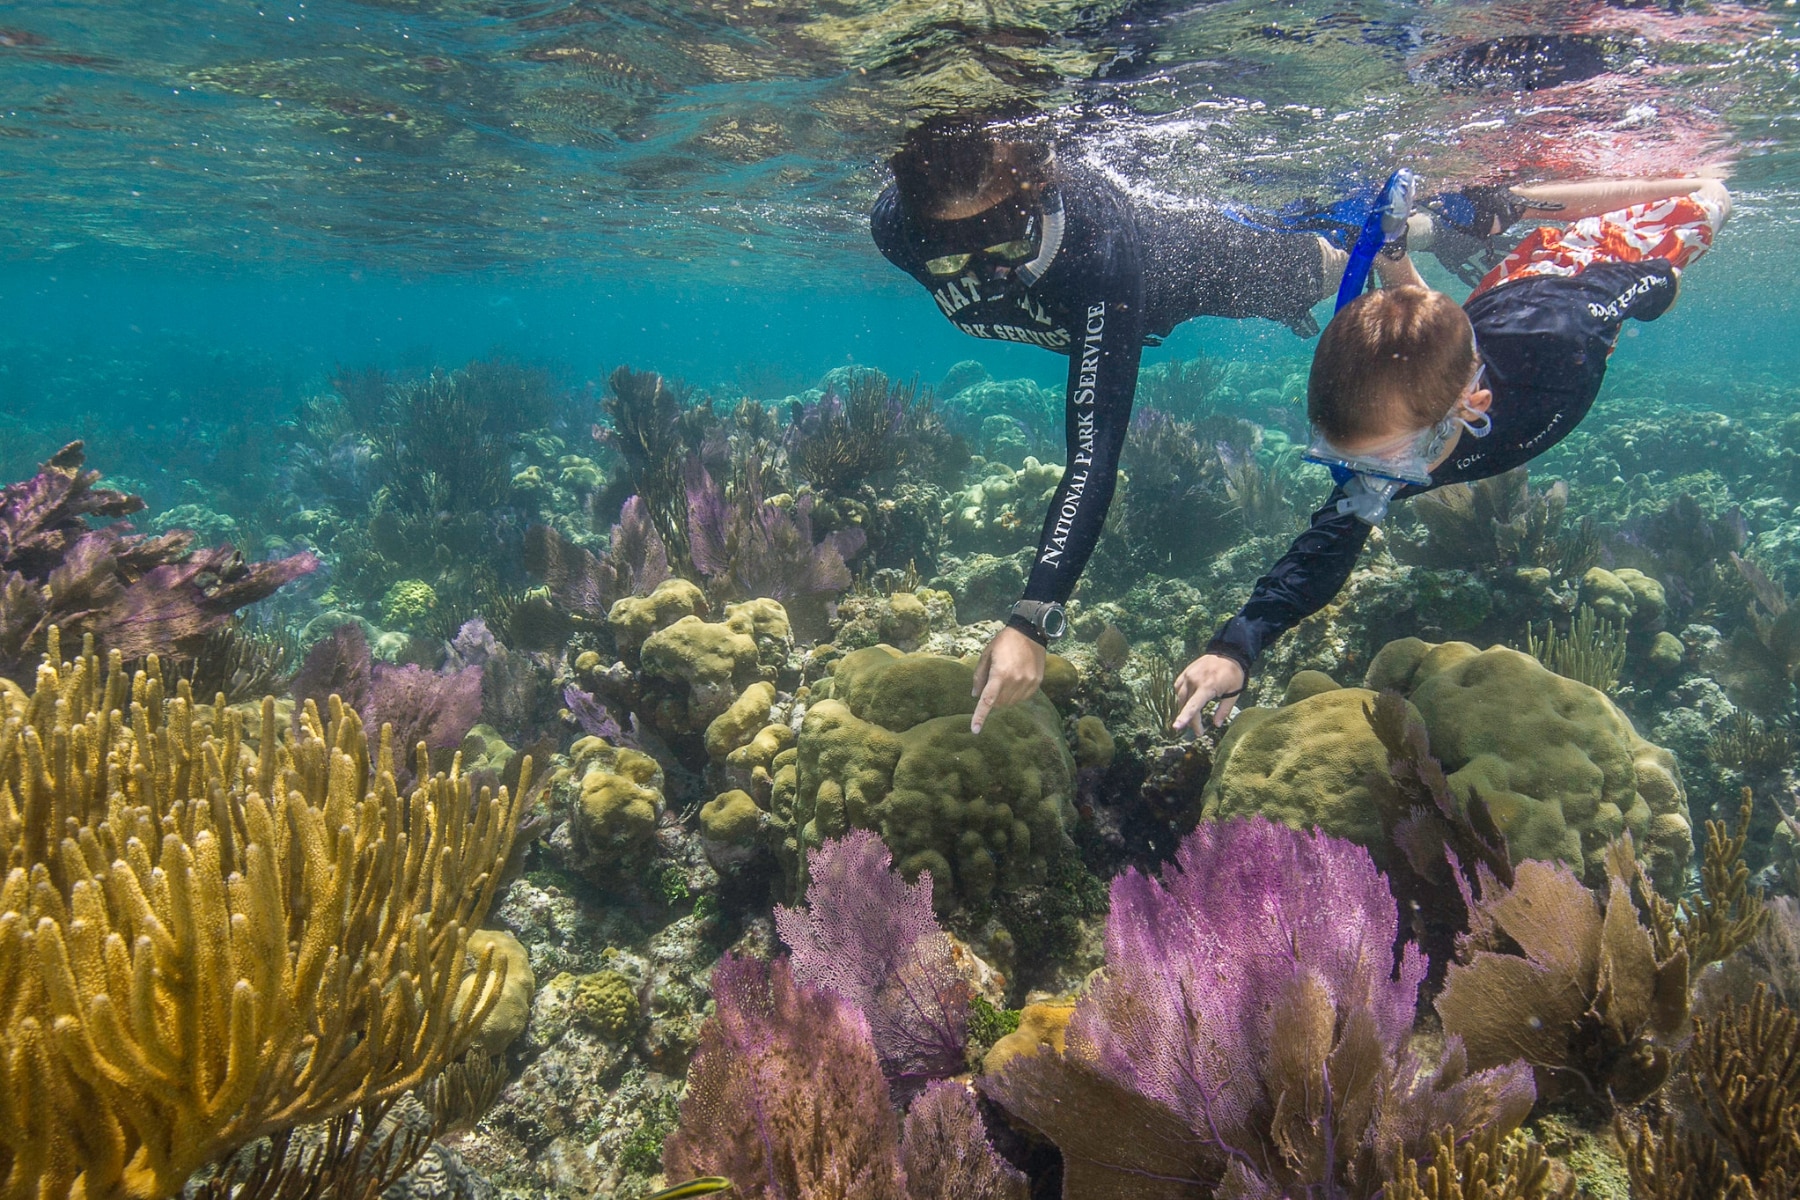 A snorkeler floats above a reef with colorful plants and marine life in Dry Tortugas.